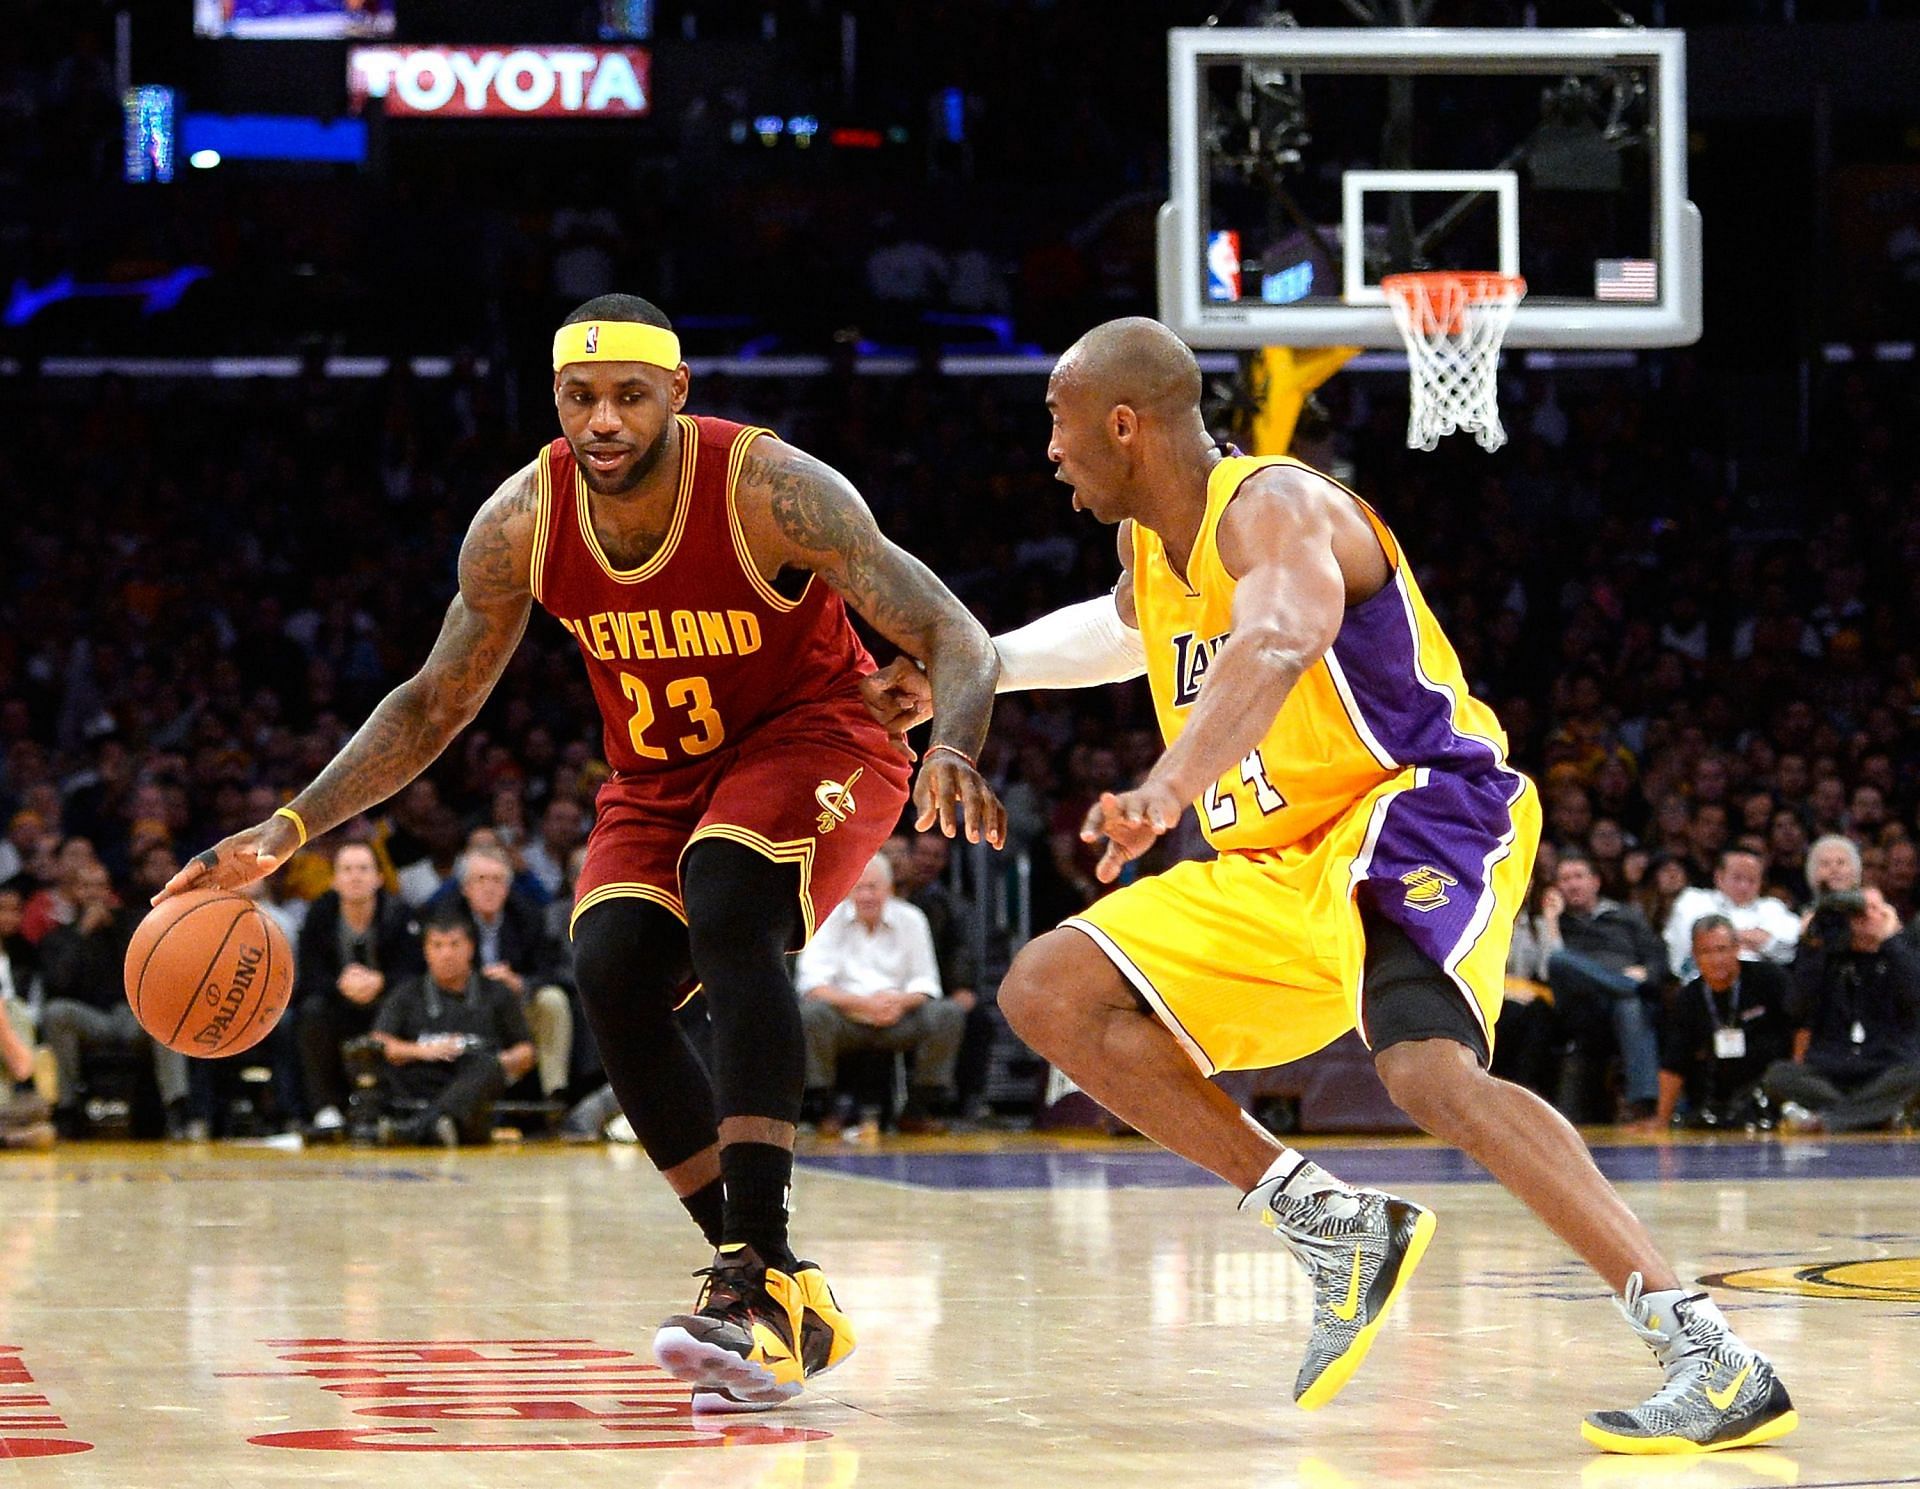 LeBron James #23 of the Cleveland Cavaliers dribbles as he is guarded by Kobe Bryant #24 of the Los Angeles Lakers during a 109-102 Cavalier win at Staples Center on January 15, 2015 in Los Angeles, California